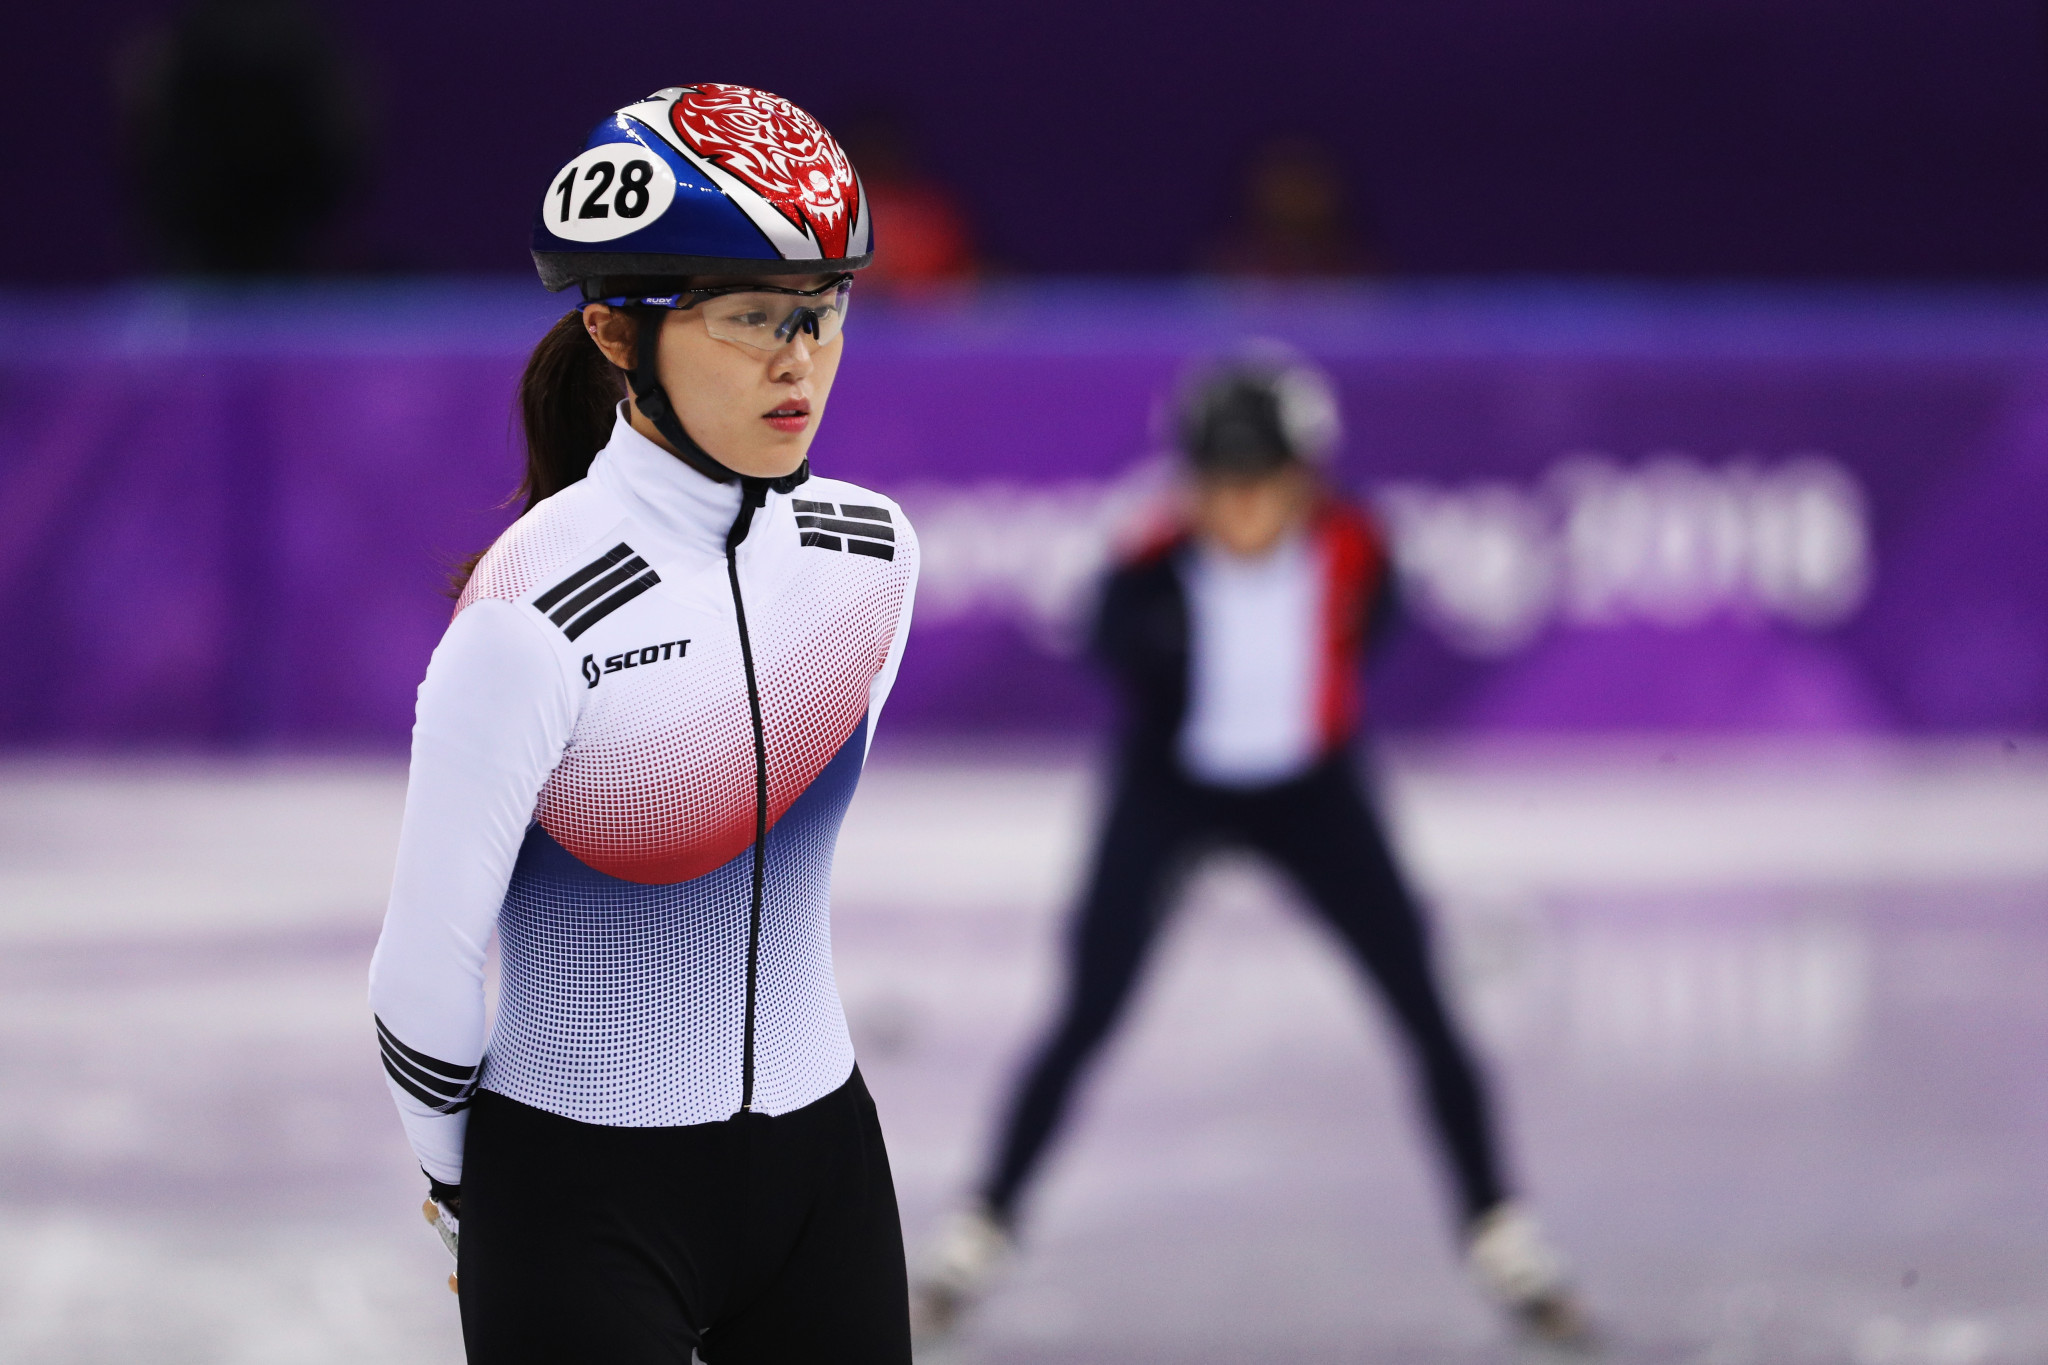 Short track skaters Kwak and Kim to carry South Korea's flag at Beijing 2022 Opening Ceremony 